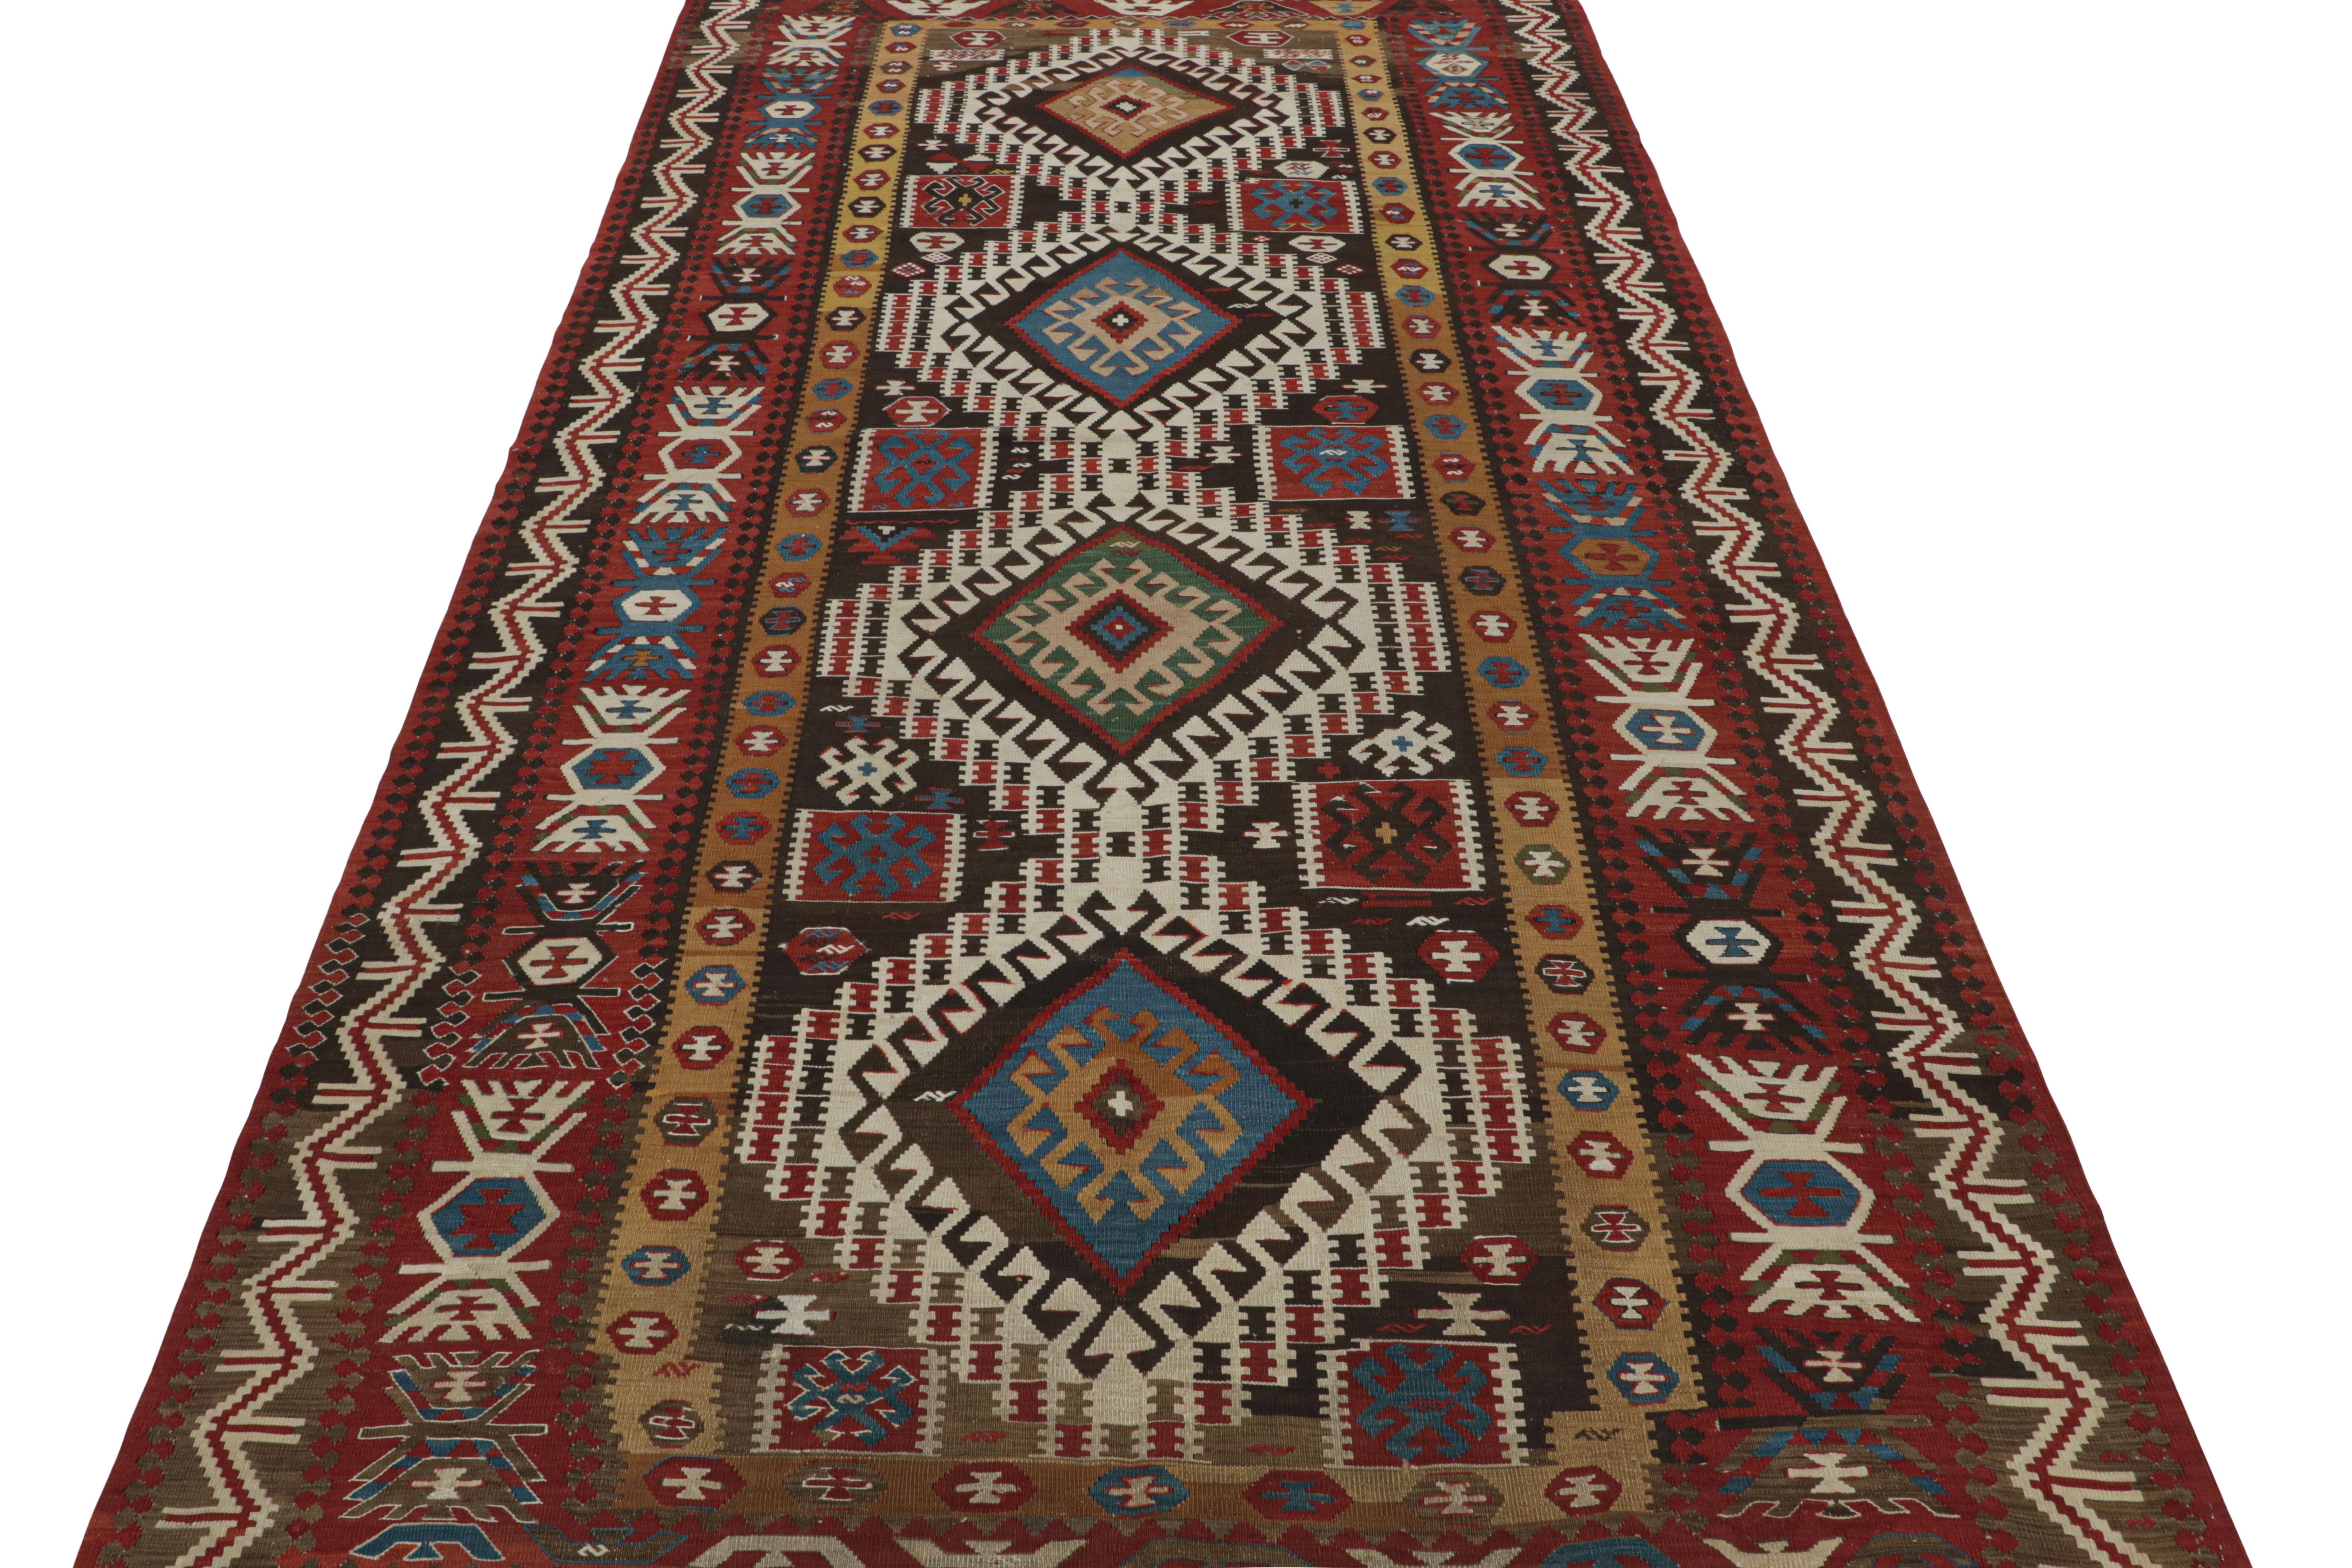 Vintage Midcentury Surakhani Geometric Beige-Brown and Burgundy Wool Kilim Rug In Good Condition For Sale In Long Island City, NY